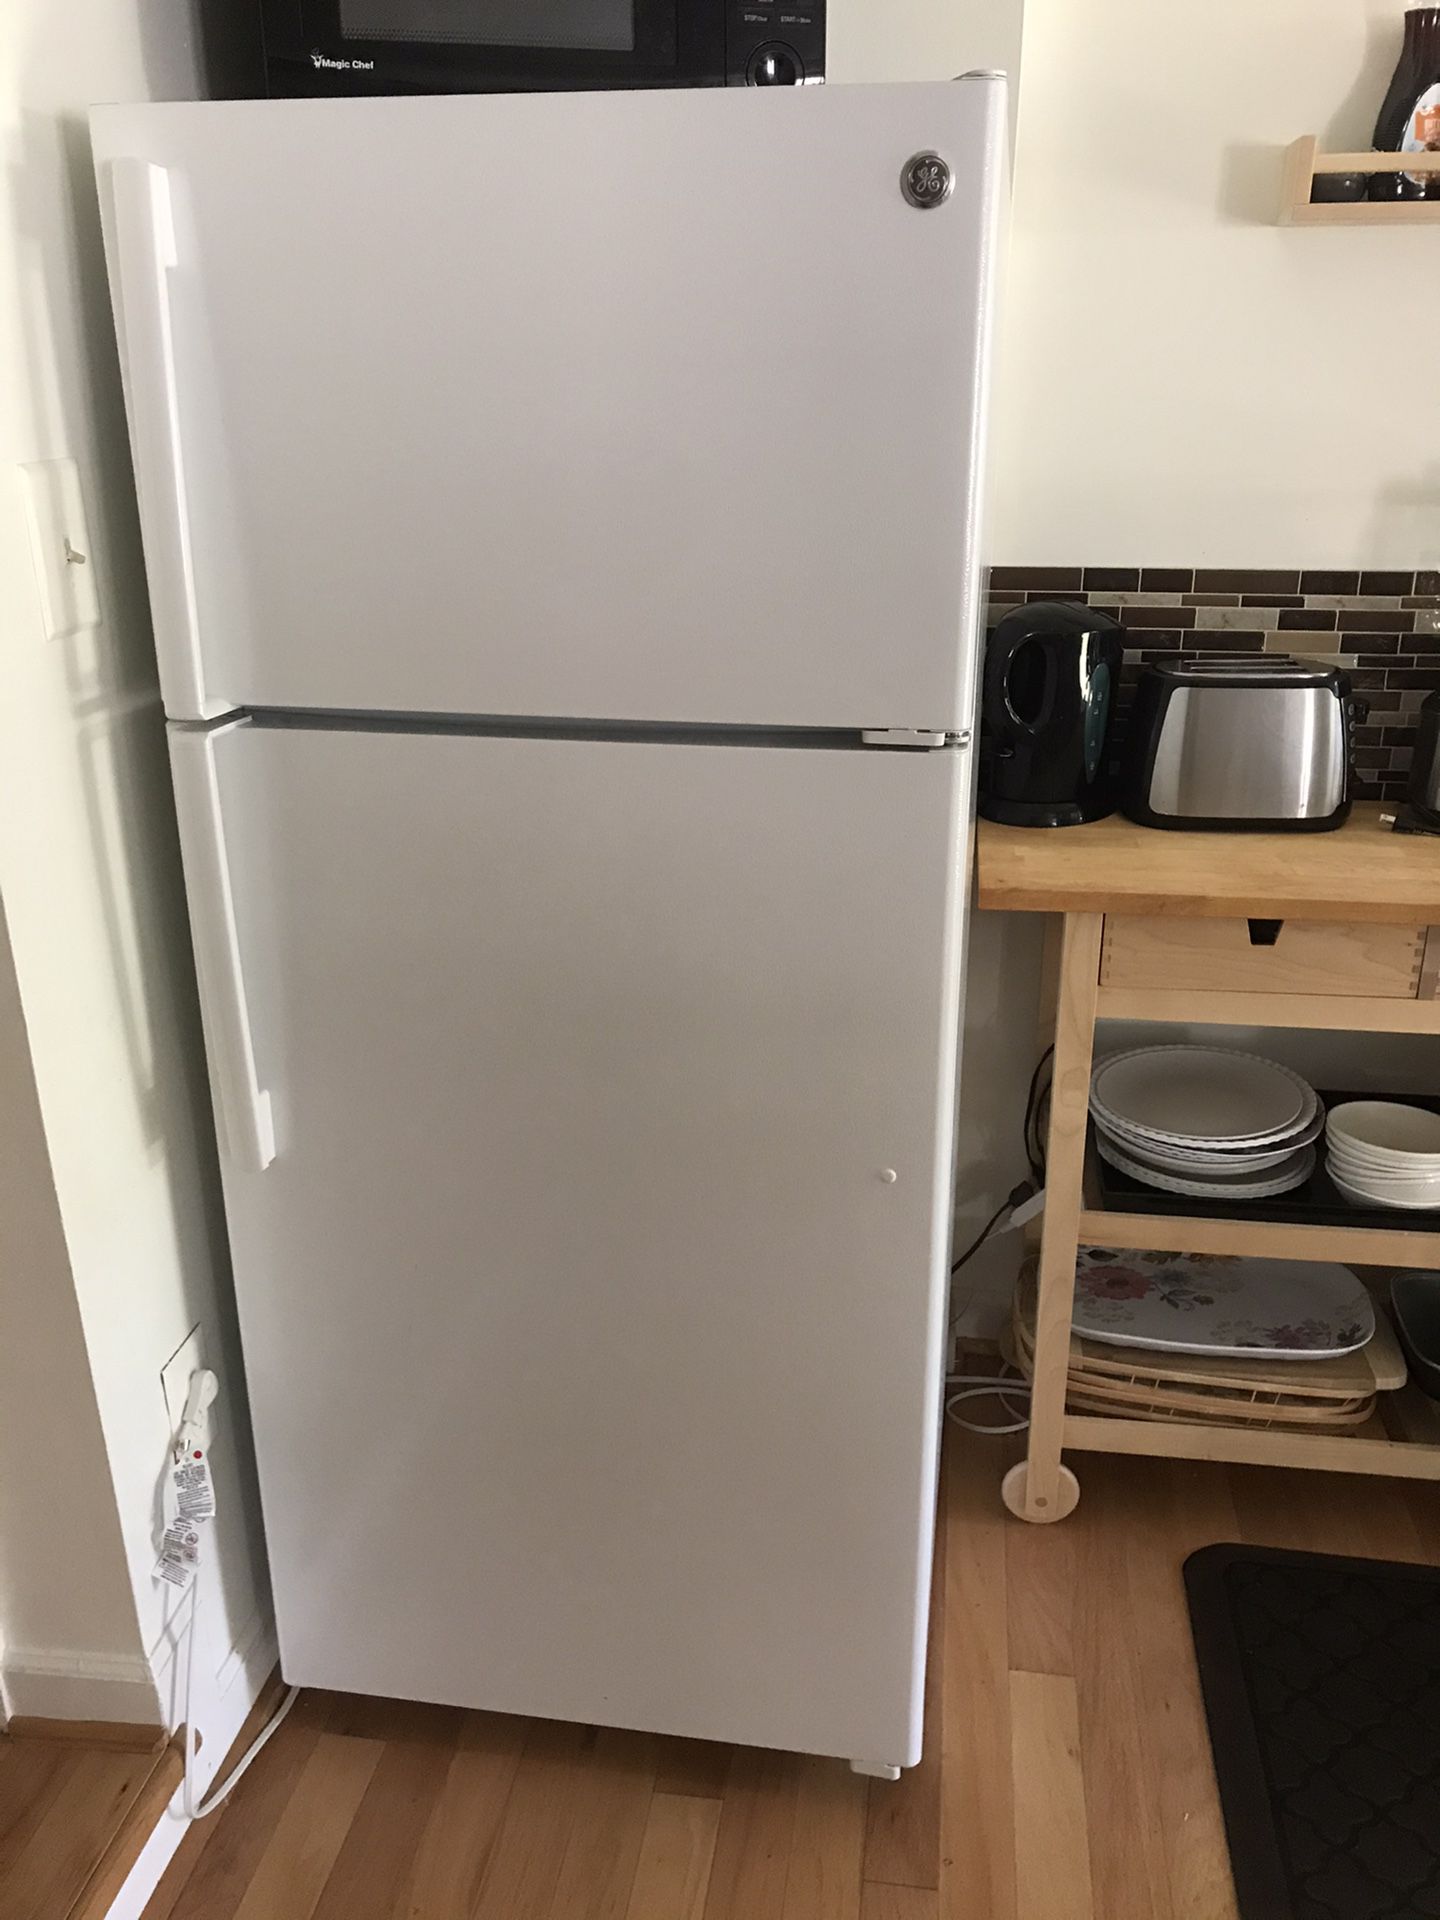 Refrigerator General Electric - used for less than a year